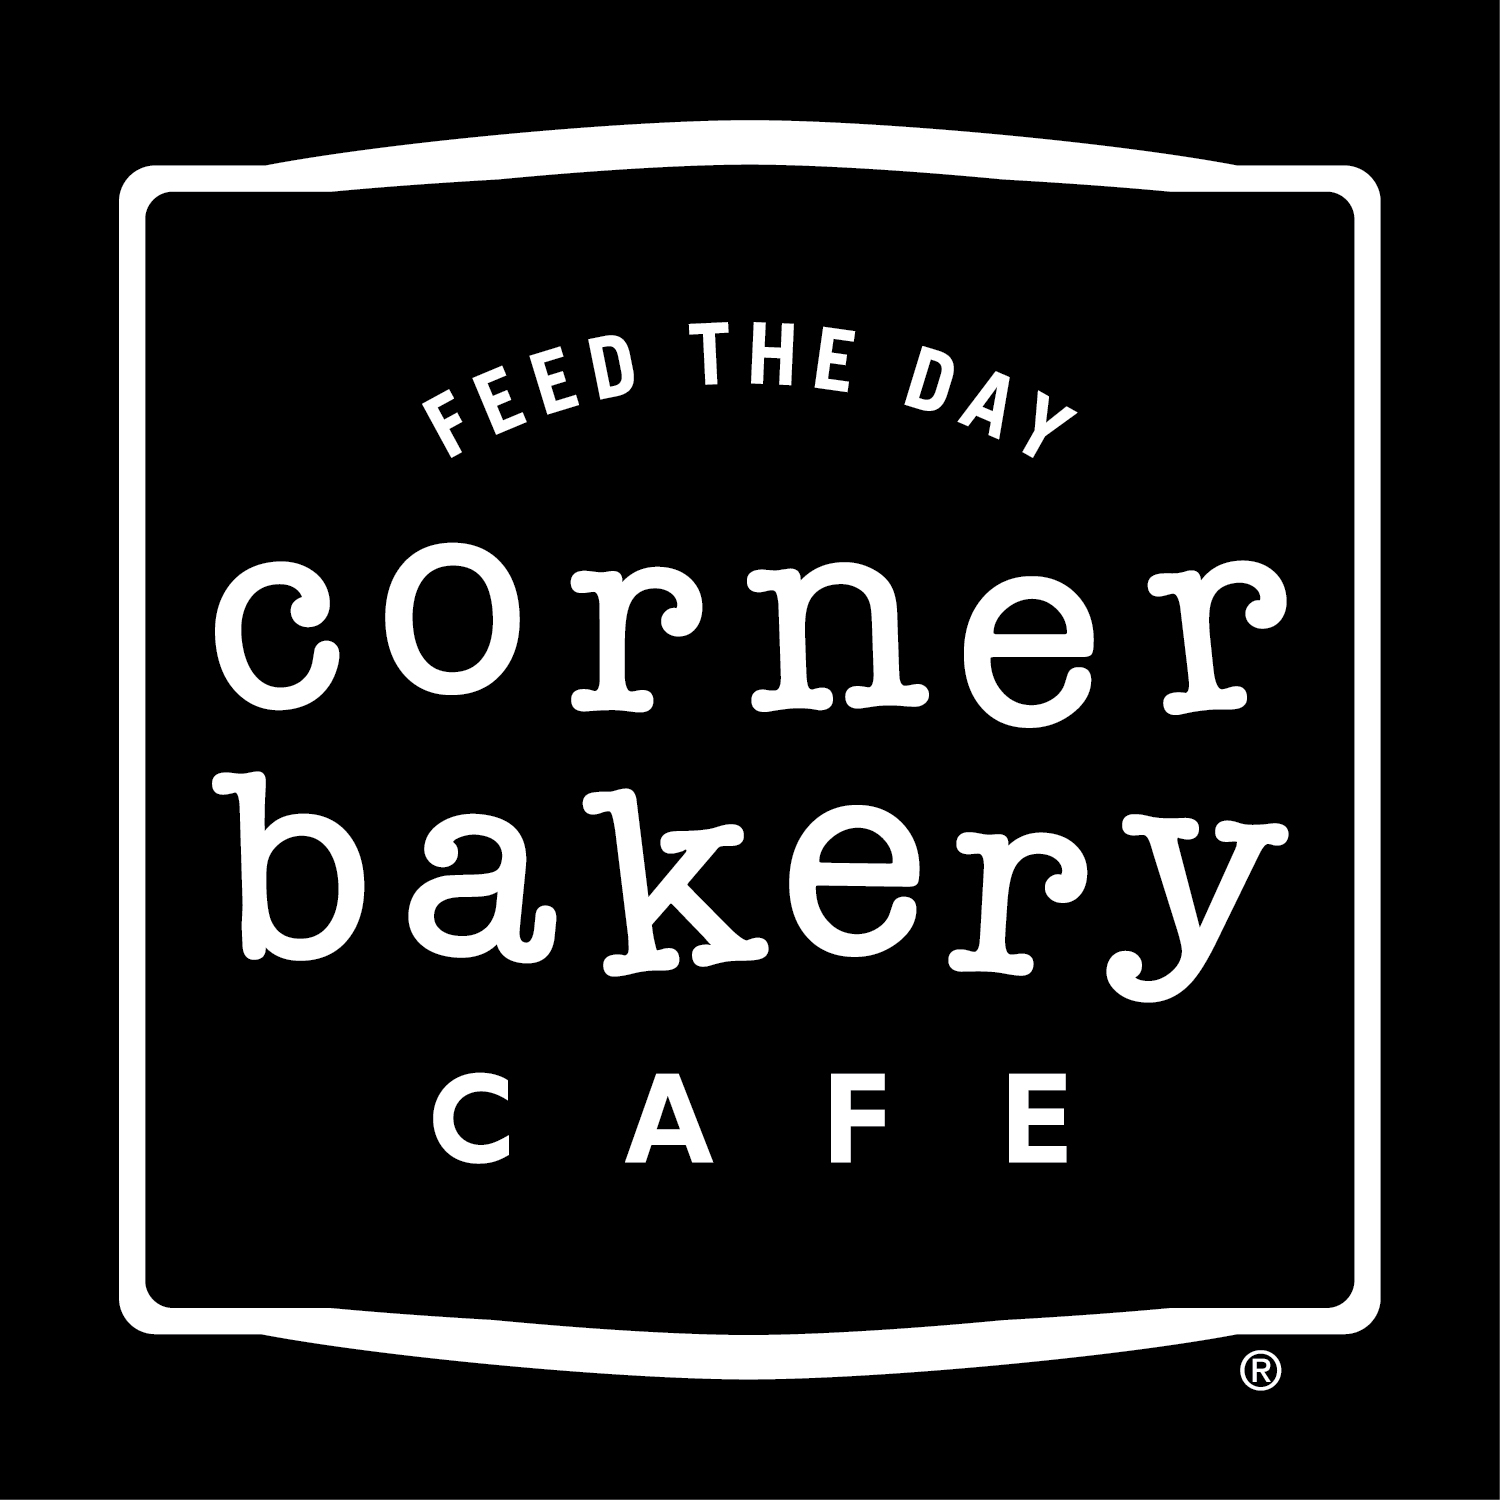 Corner Bakery Cafe: Buy One, Get One Free Coupon